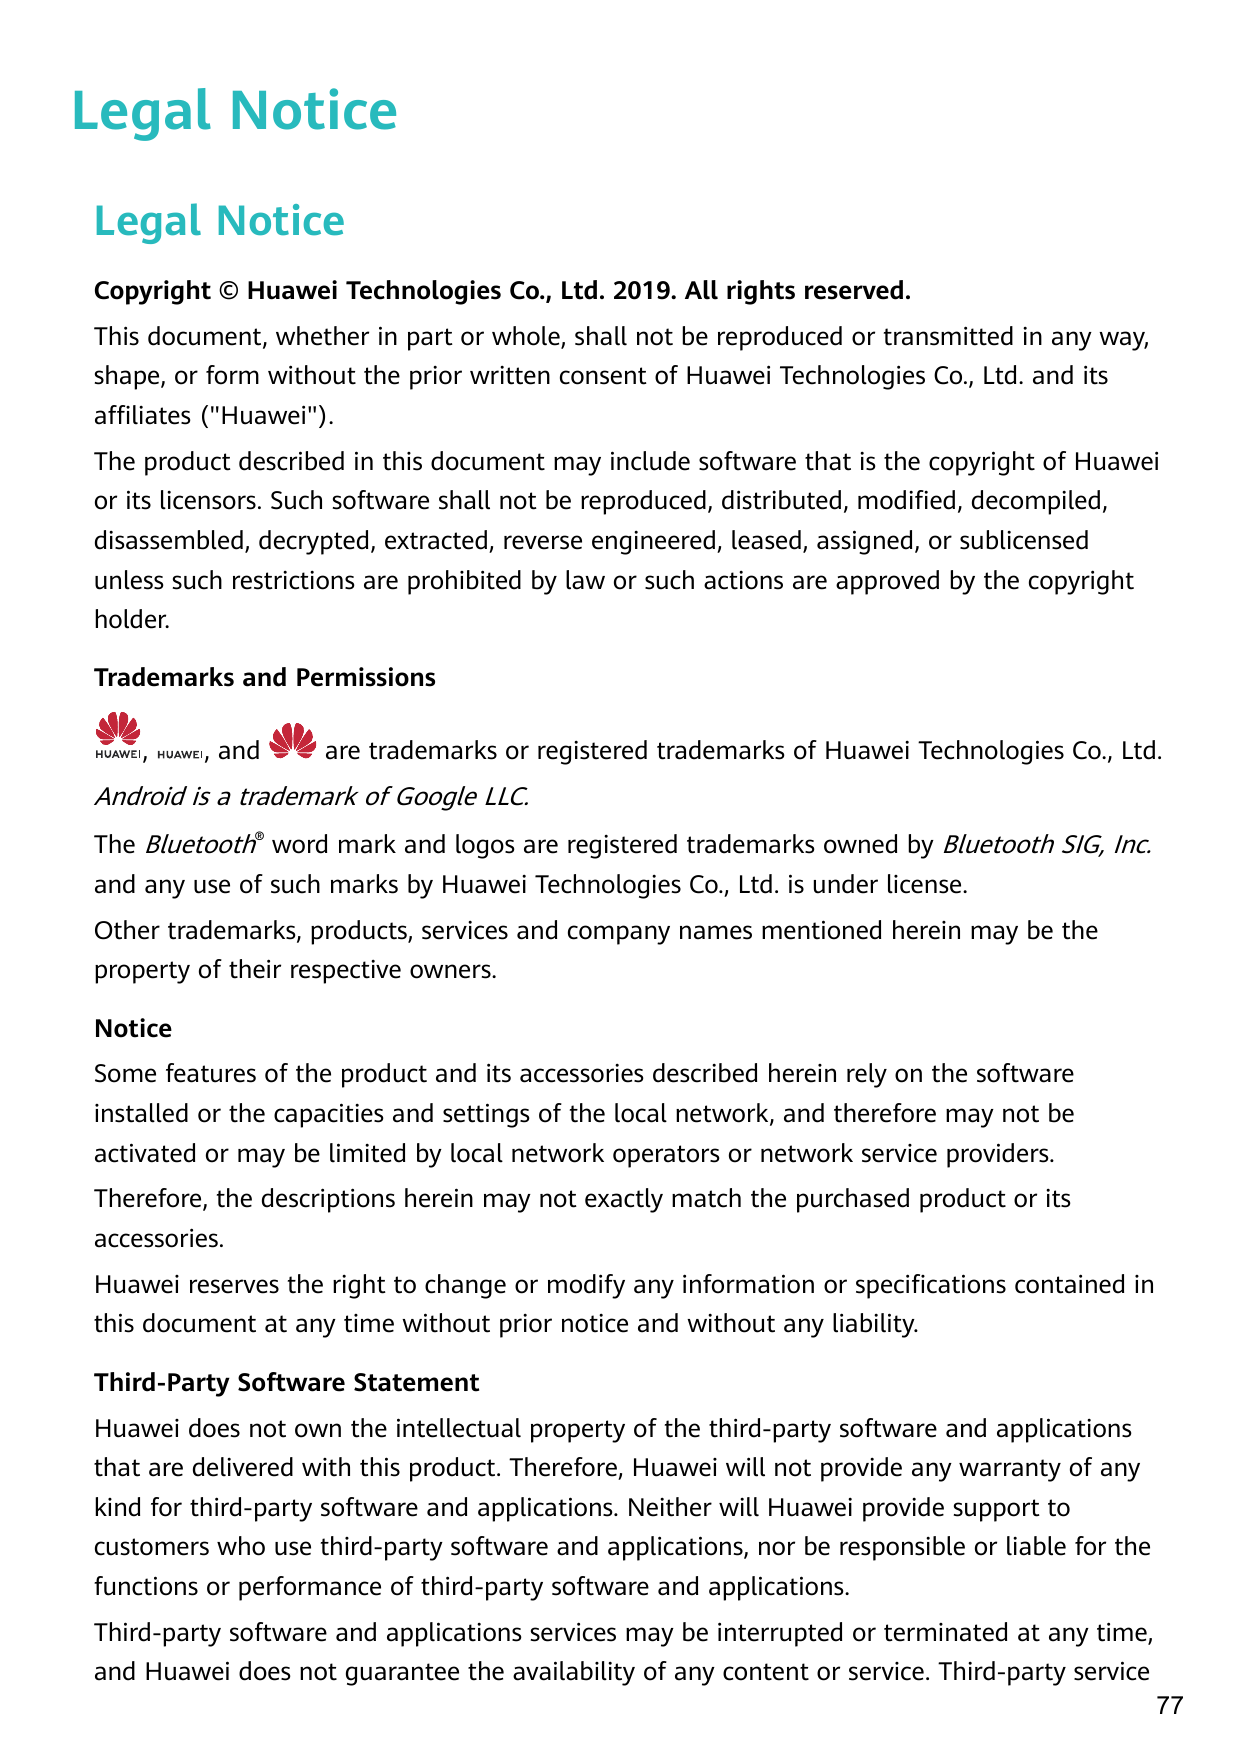 Legal NoticeLegal NoticeCopyright © Huawei Technologies Co., Ltd. 2019. All rights reserved.This document, whether in part or wh